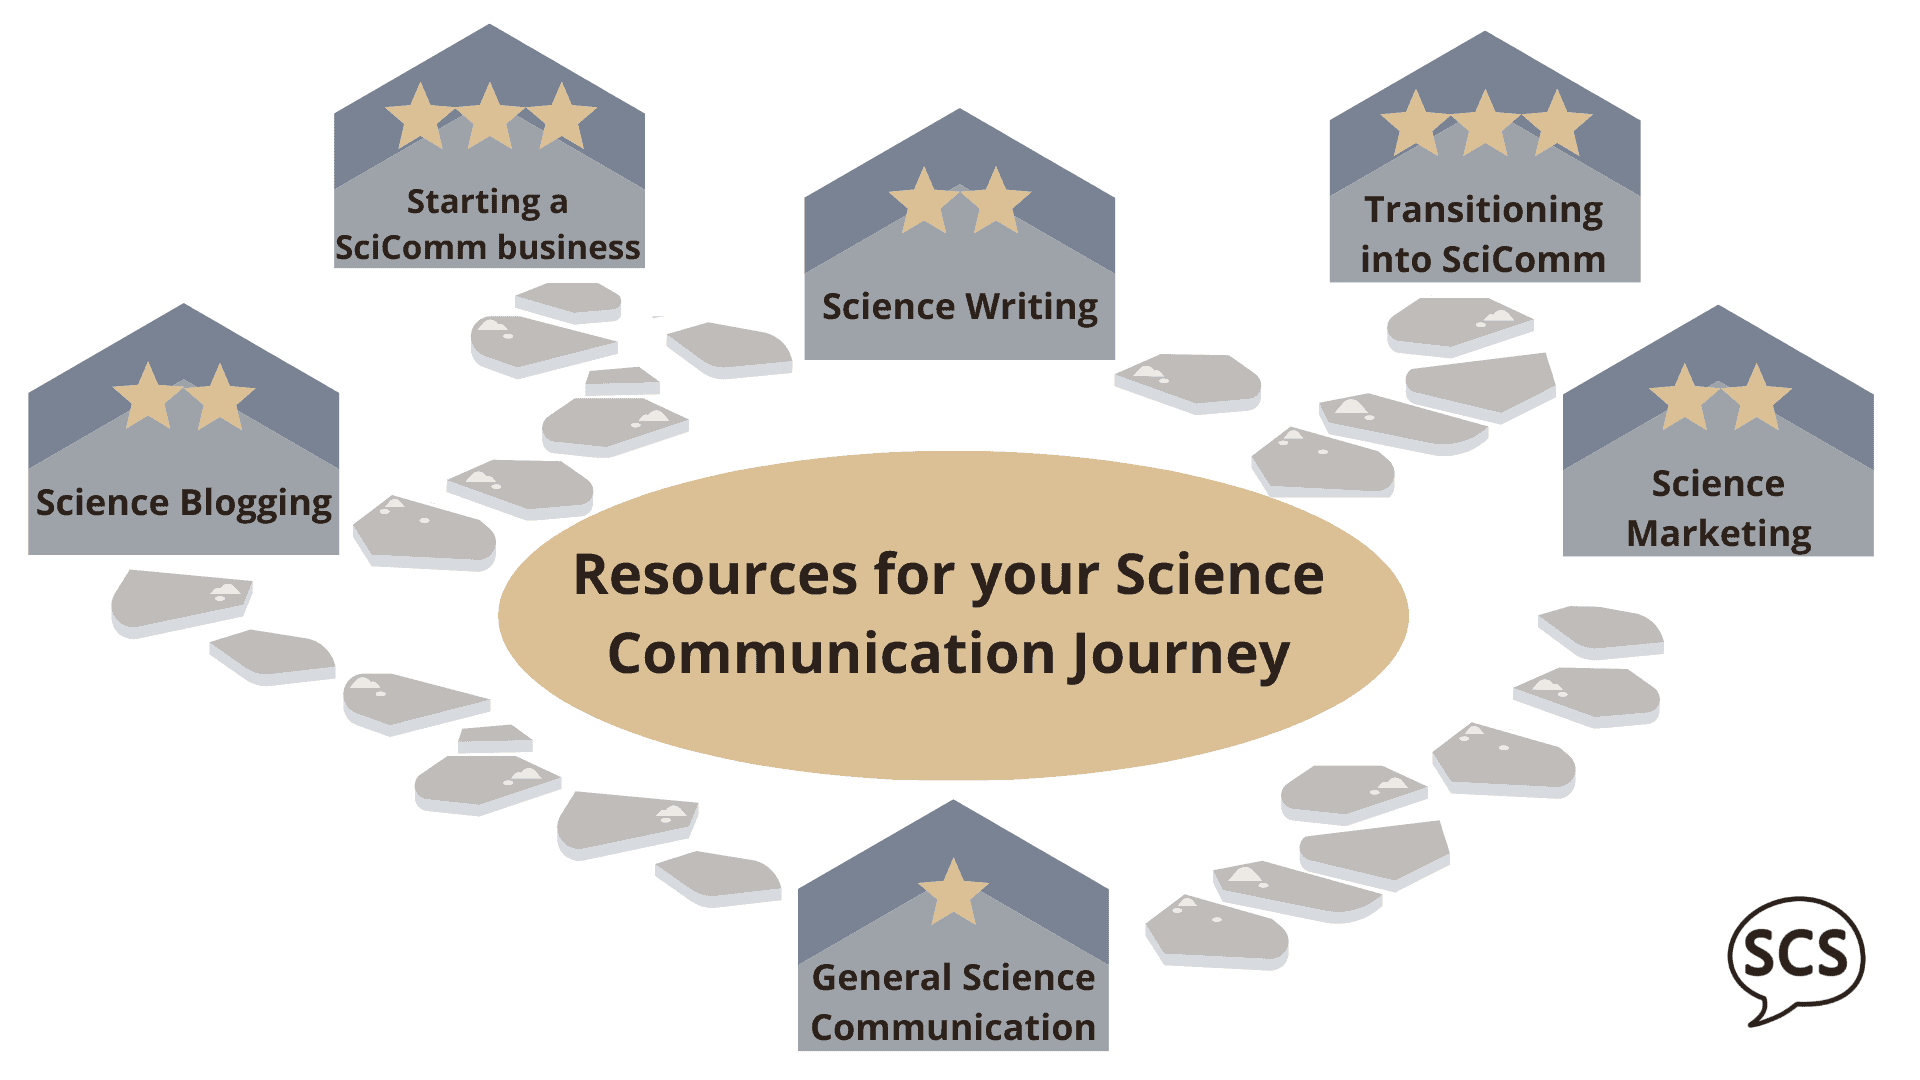 Resources for Science communication